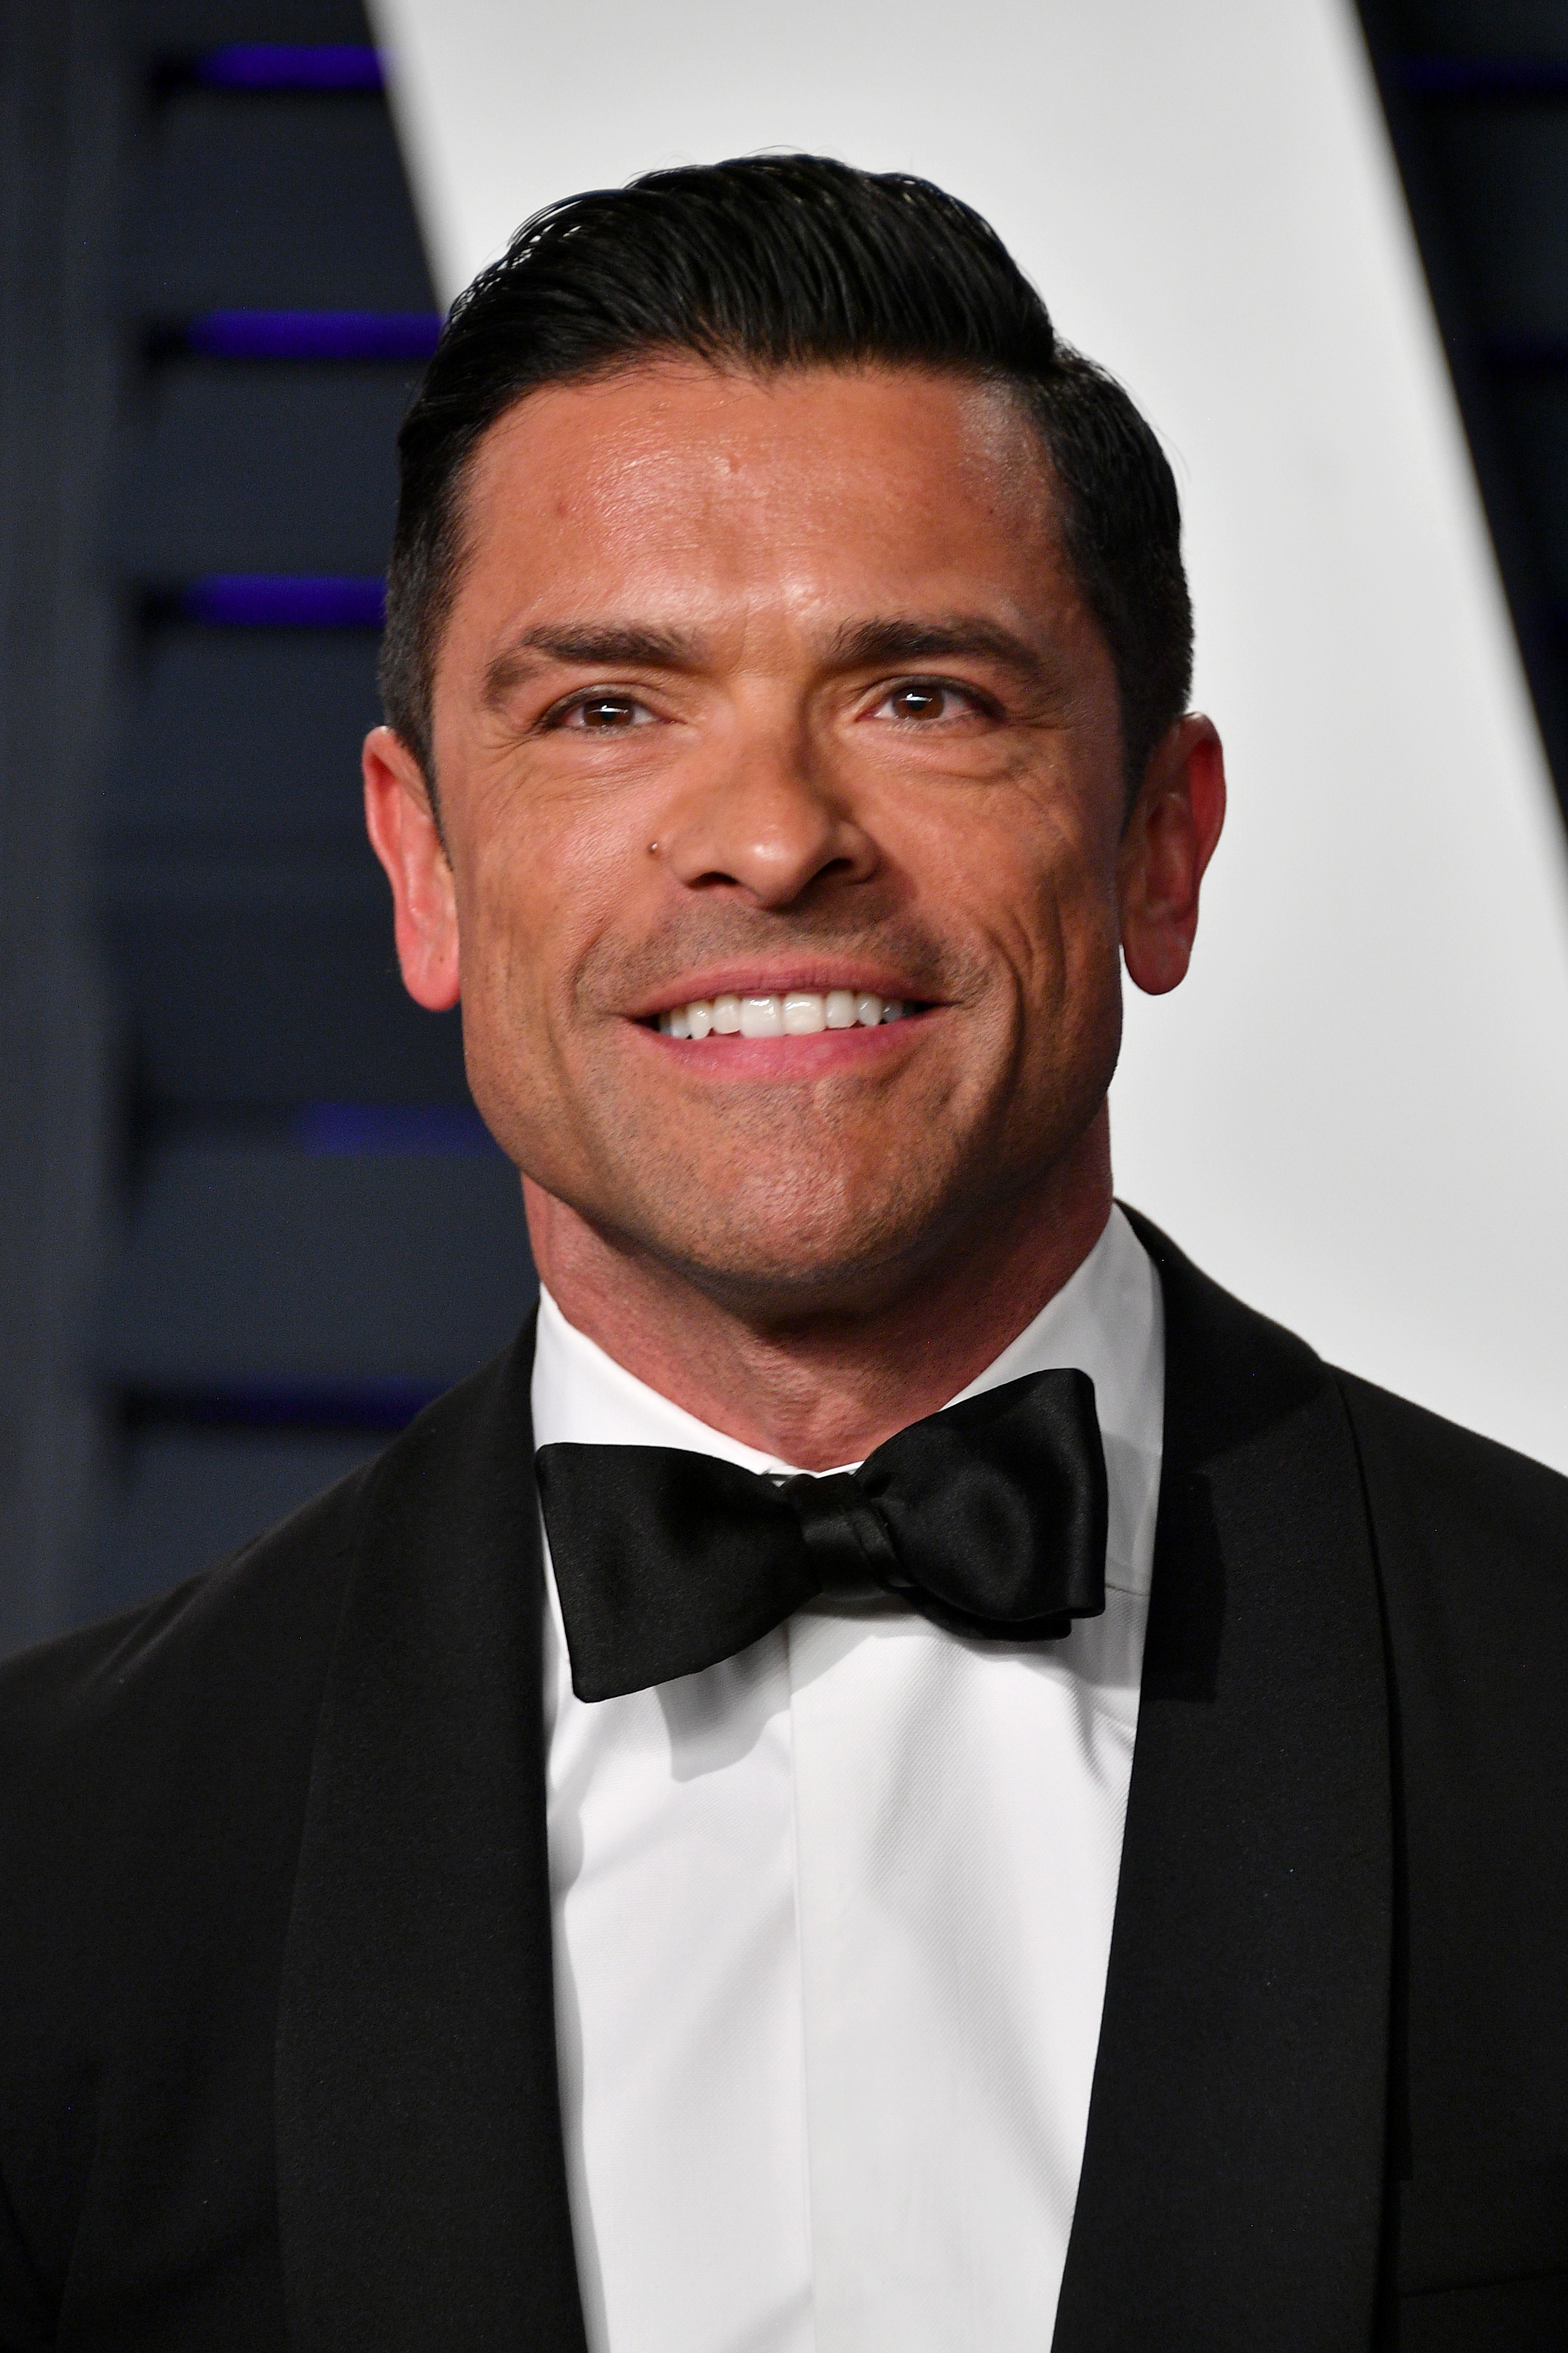 Mark Consuelos attends the 2019 Vanity Fair Oscar Party hosted by Radhika Jones in Beverly Hills, California on February 24, 2019. | Source: Getty Images